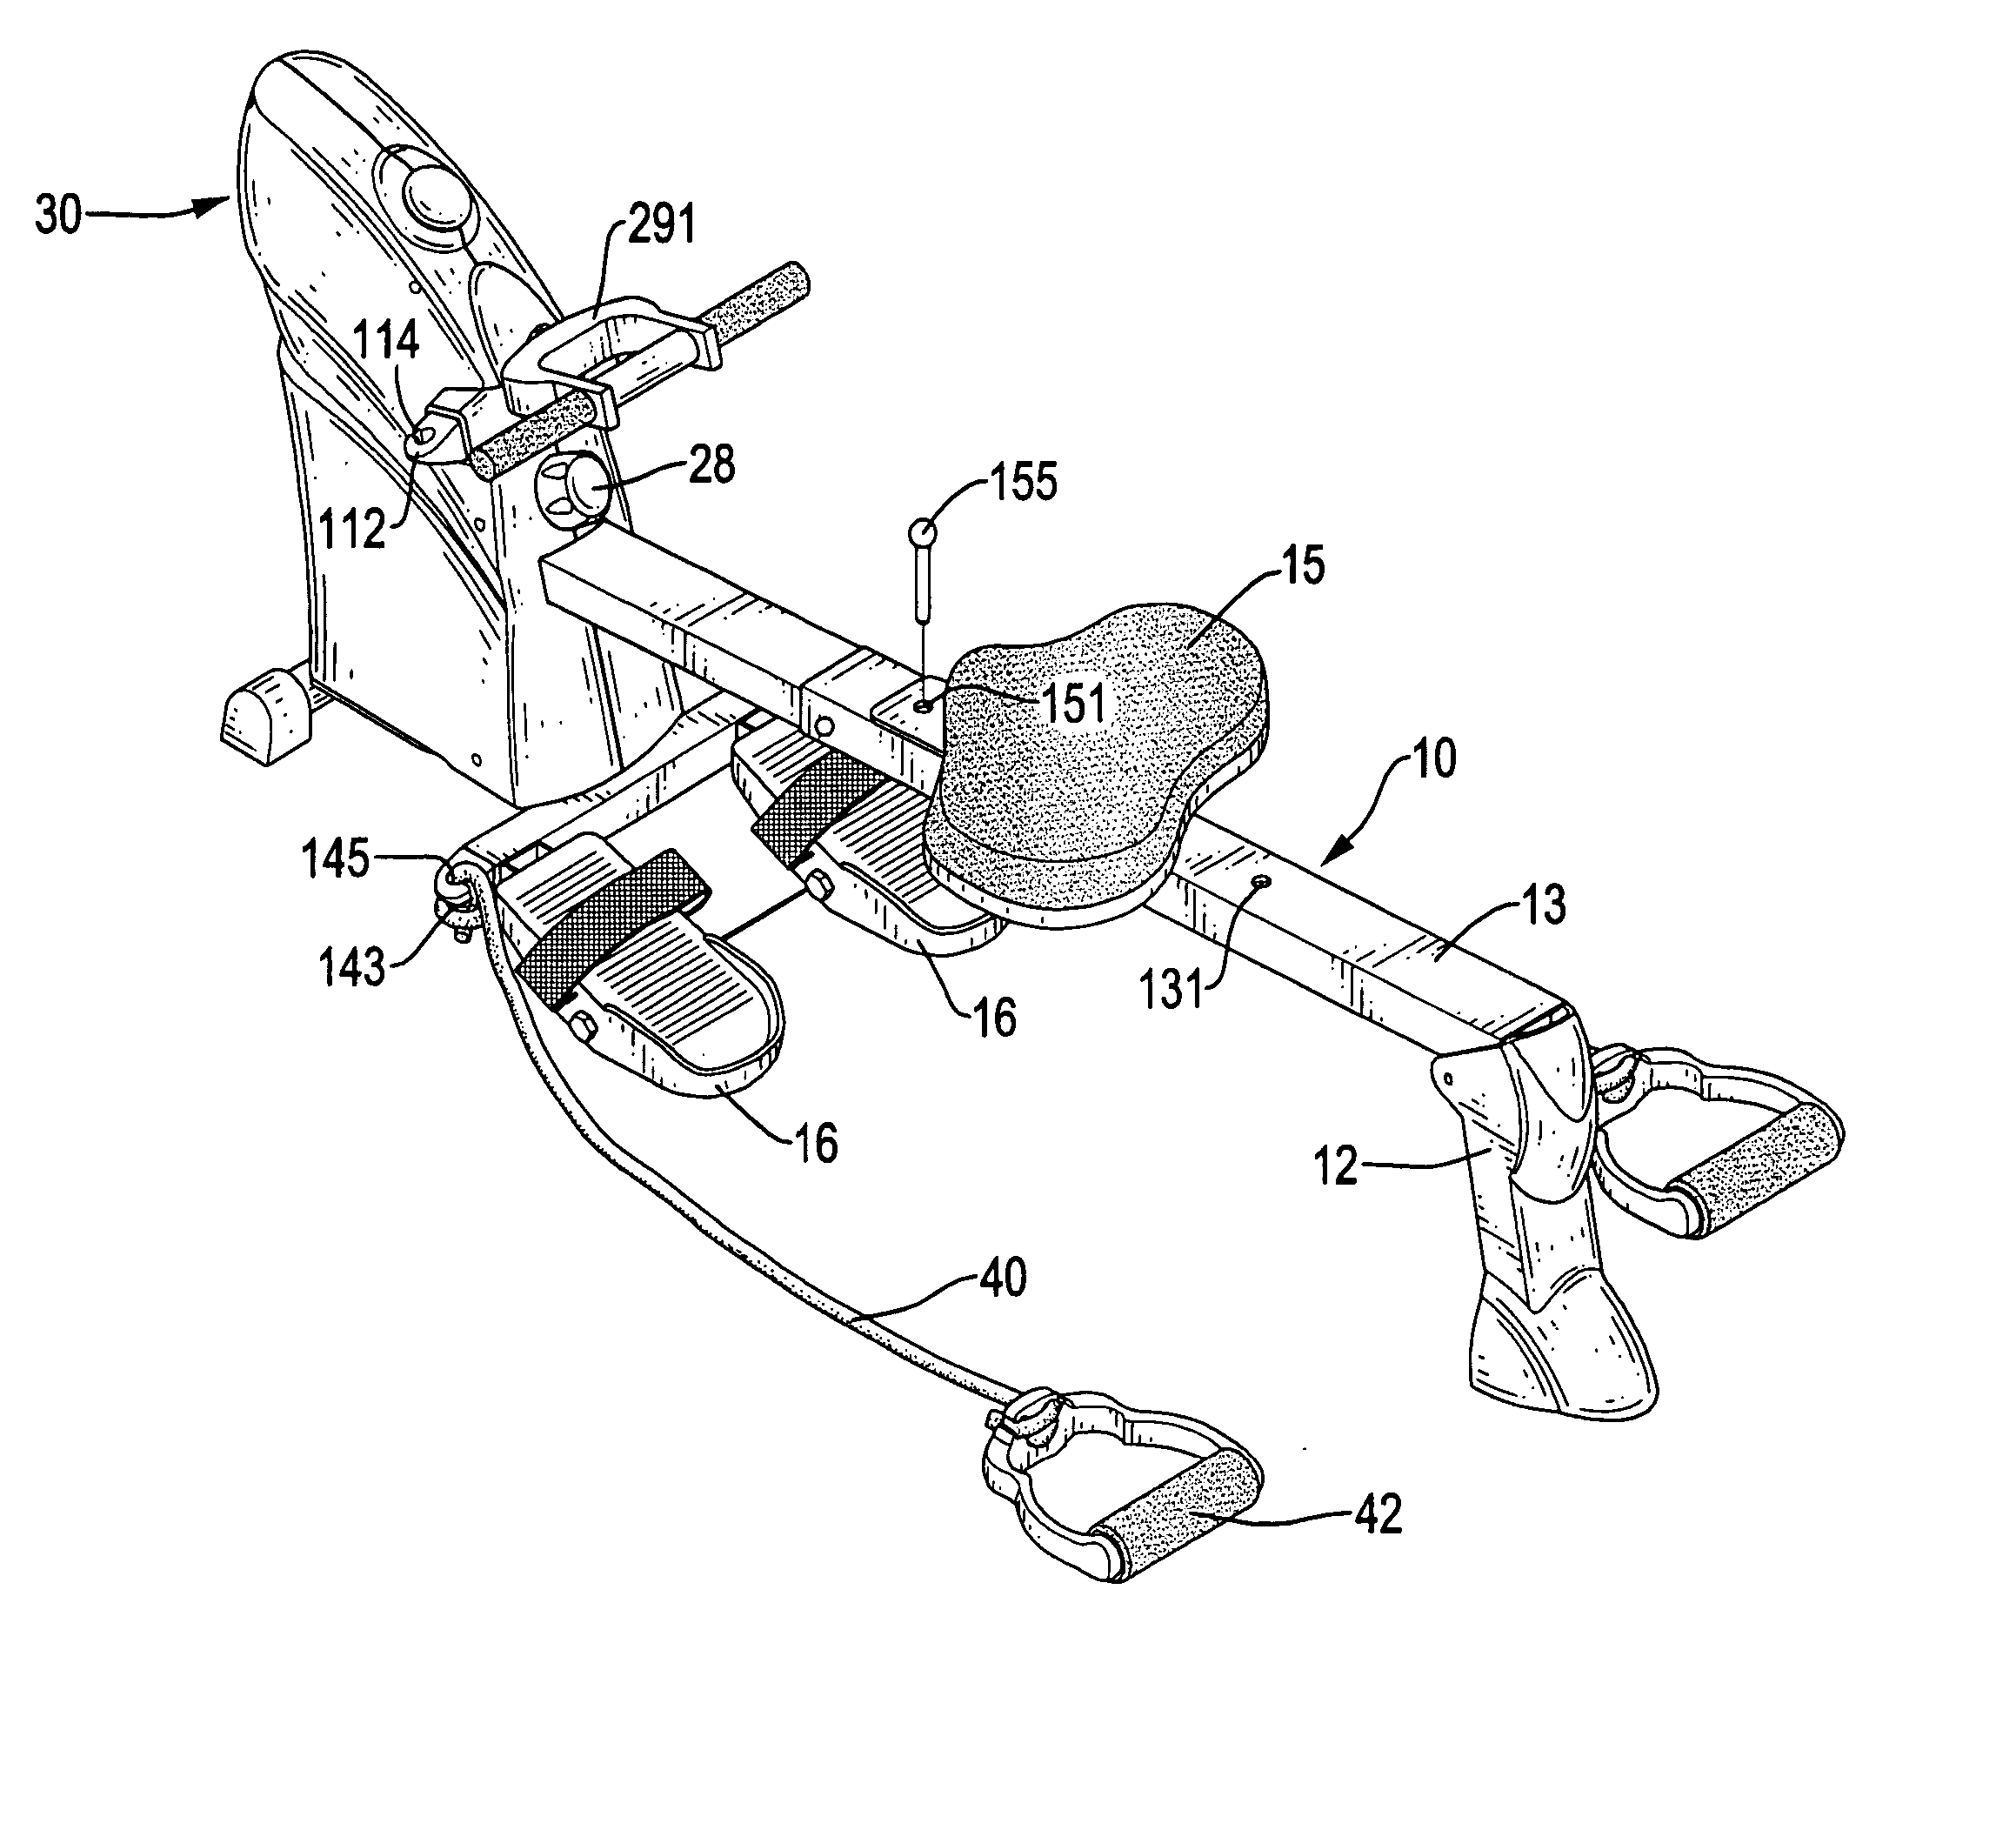 Multi-functional exercising device